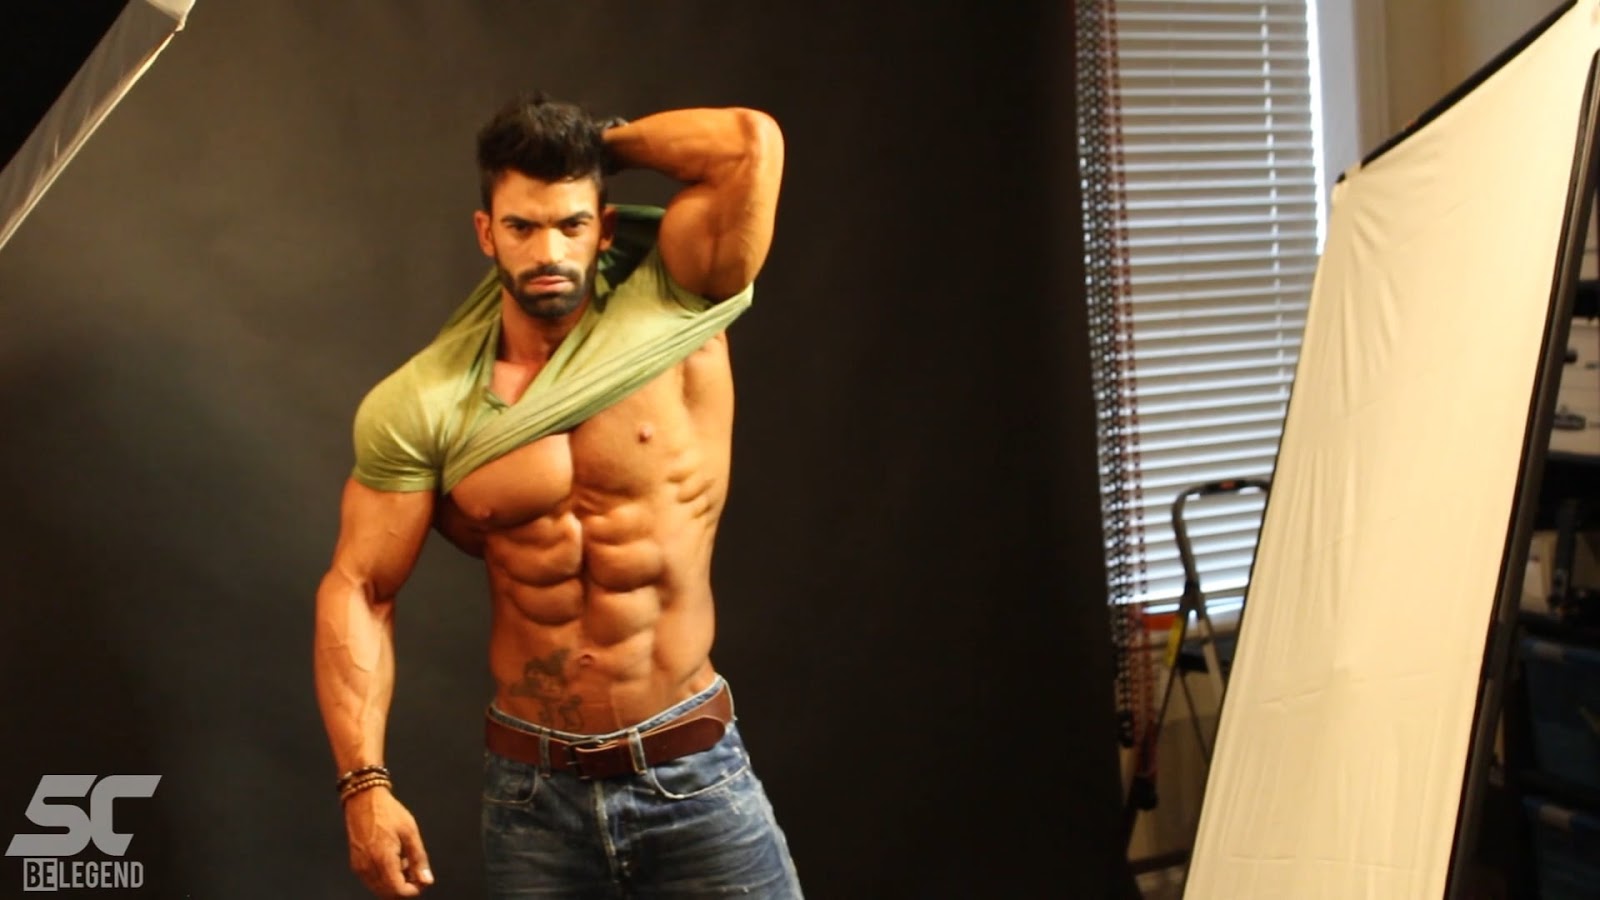 Sergi constance biography height weight diet lifestyle and photo gallery.